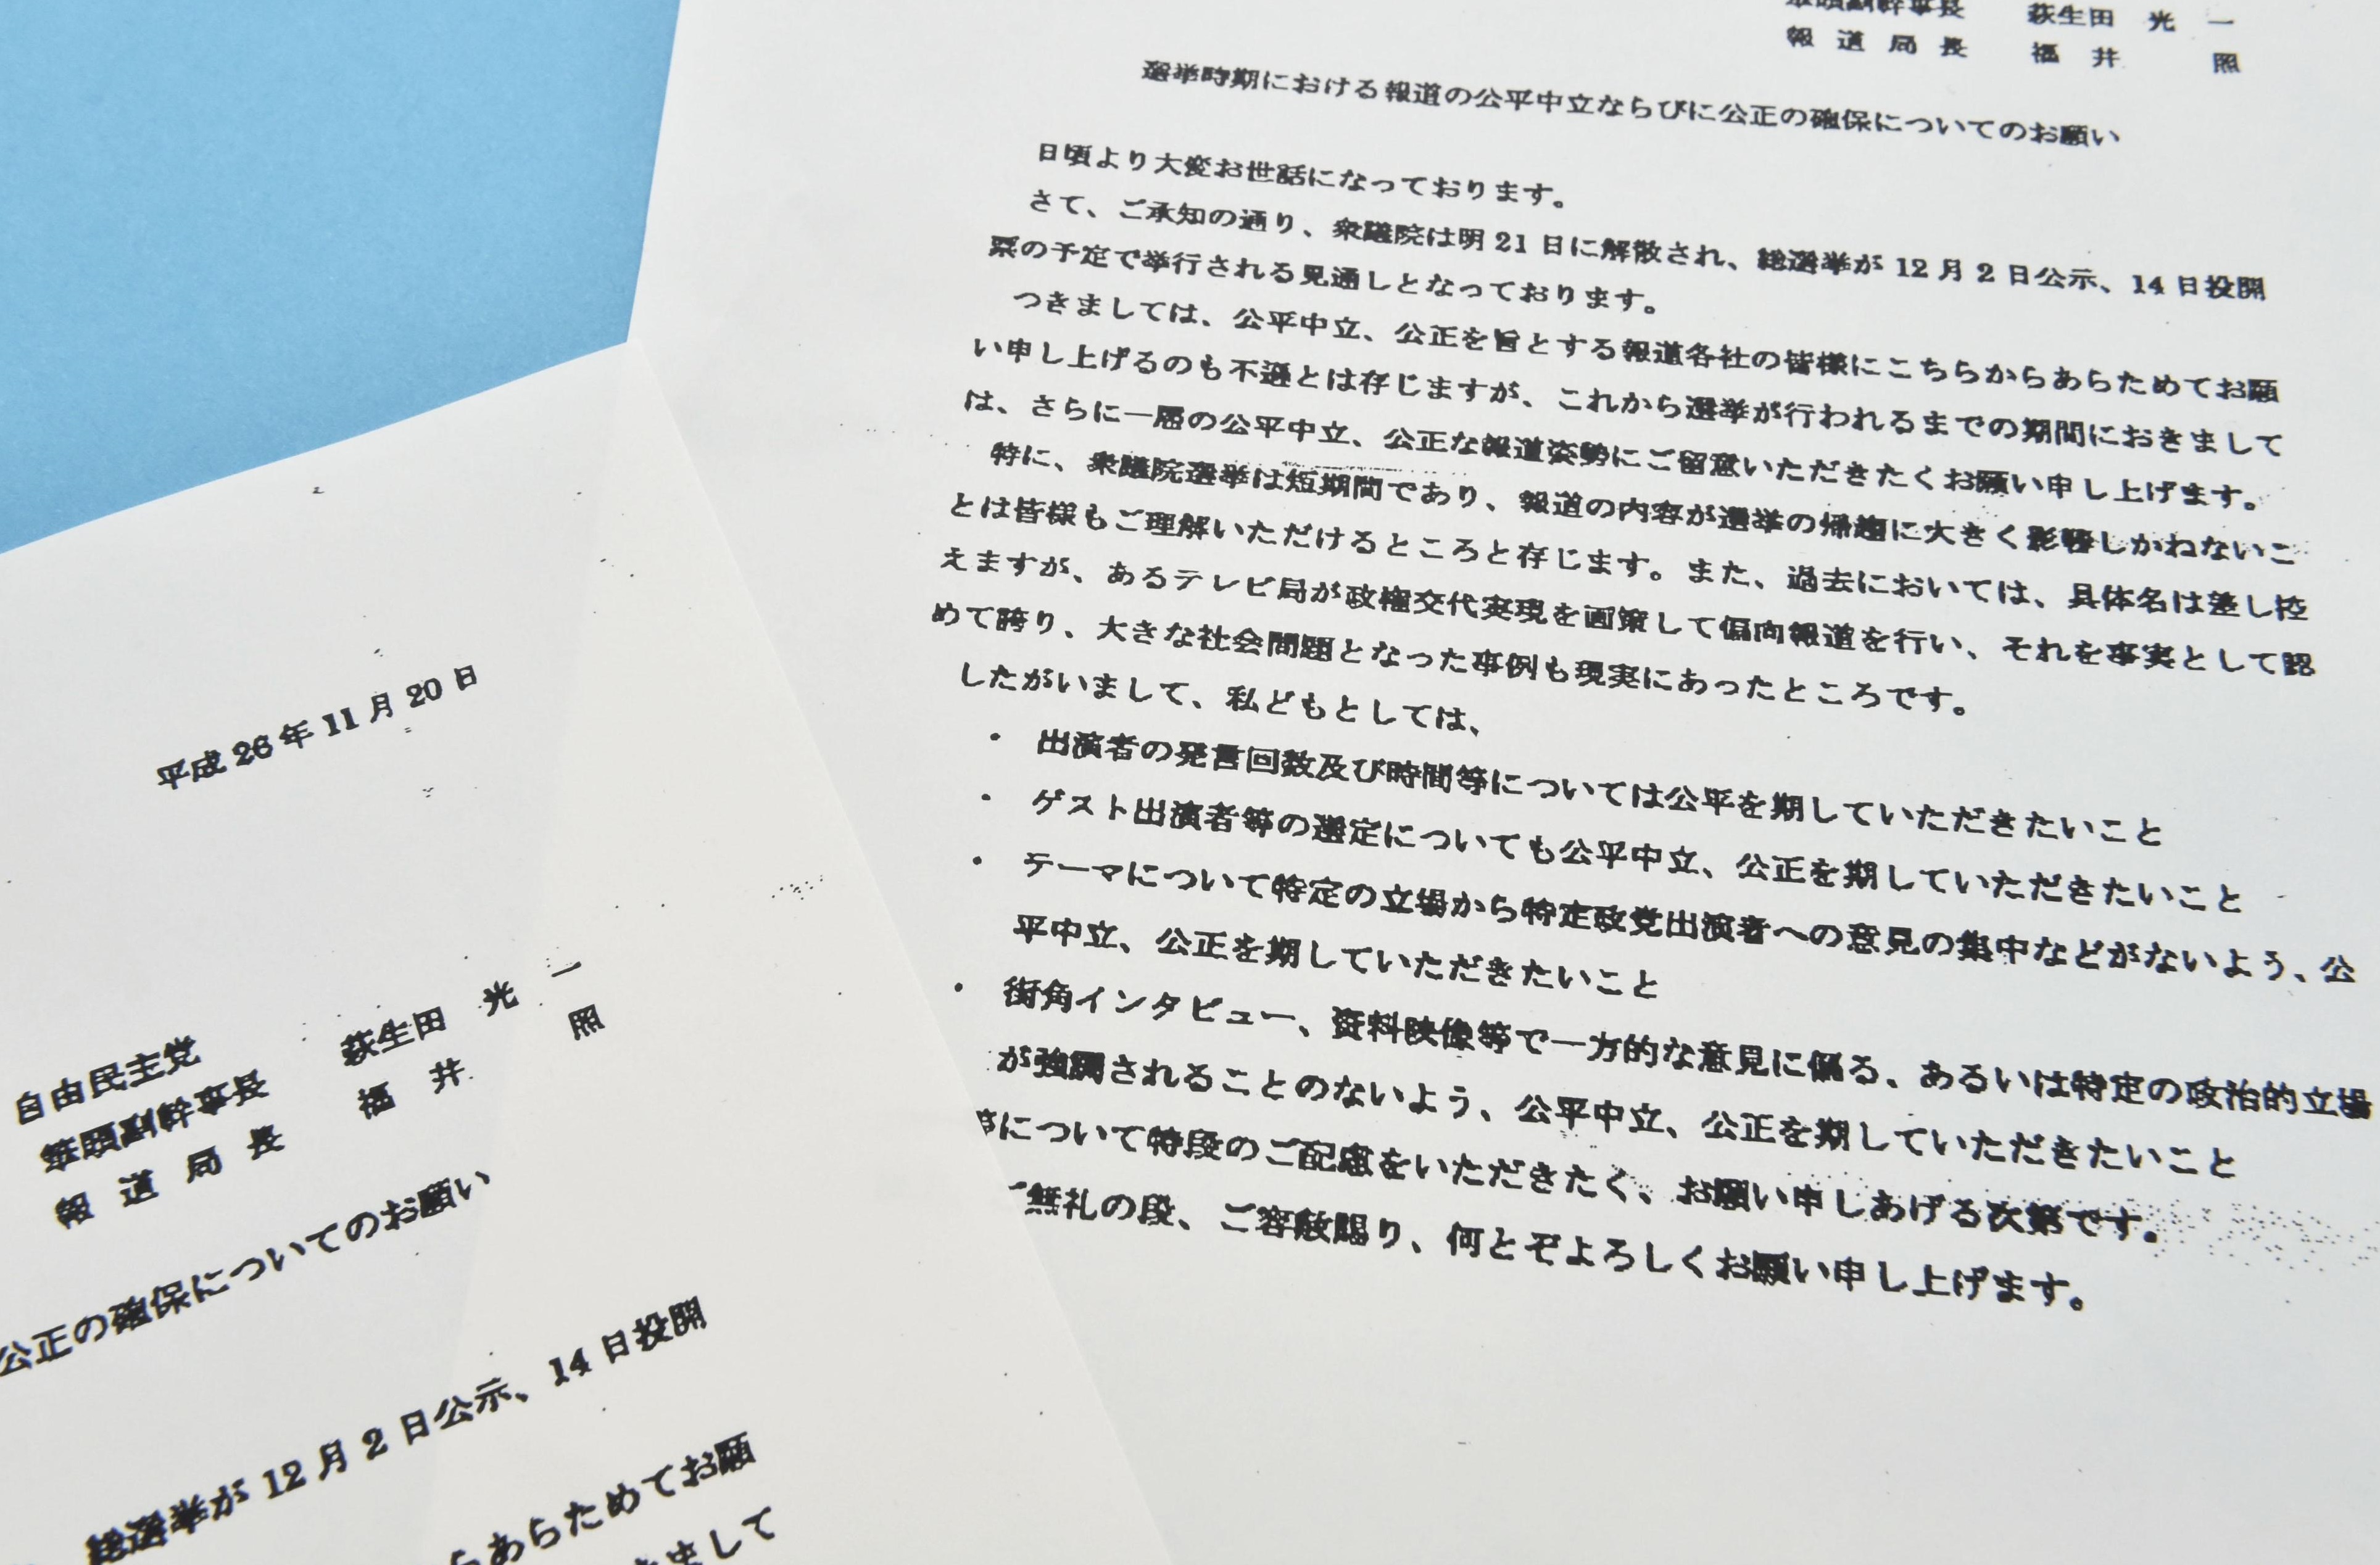 A copy of the Nov. 20 letter sent by the Liberal Democratic Party to major TV networks shows the ruling party's request for  'fair and neutral' reporting ahead of the Dec. 14 Lower House election. | KYODO